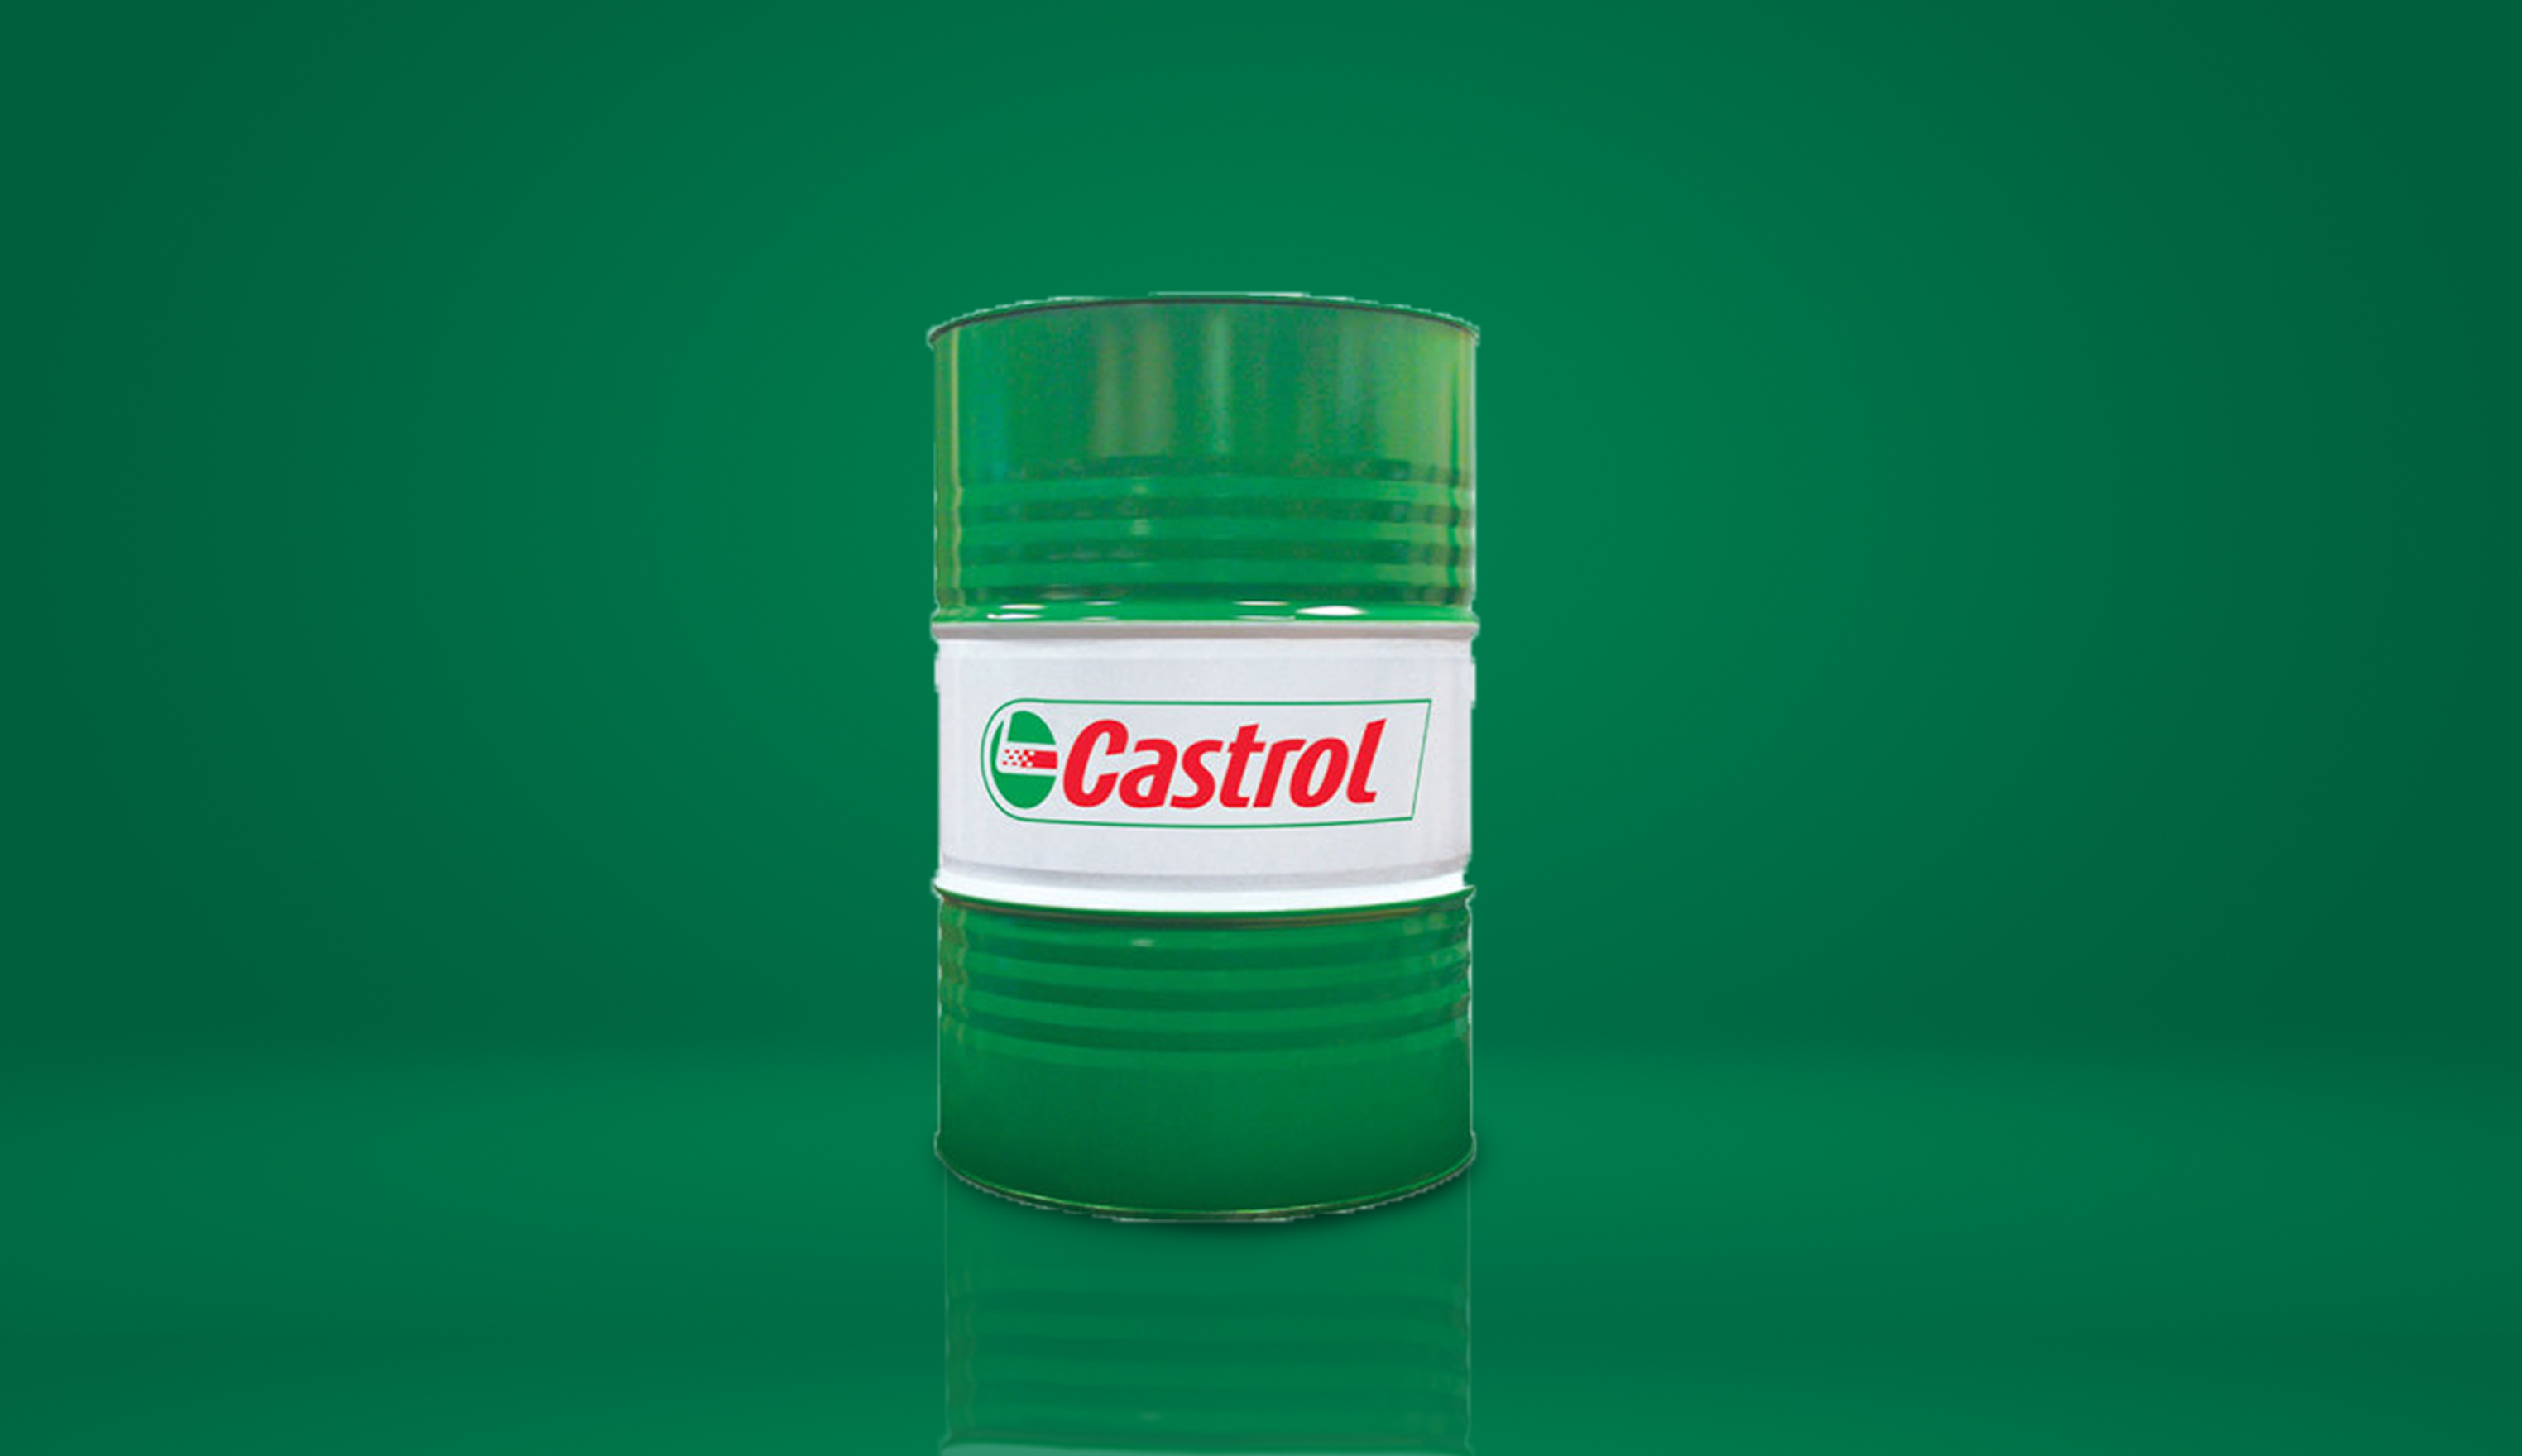 CASTROL GREASES